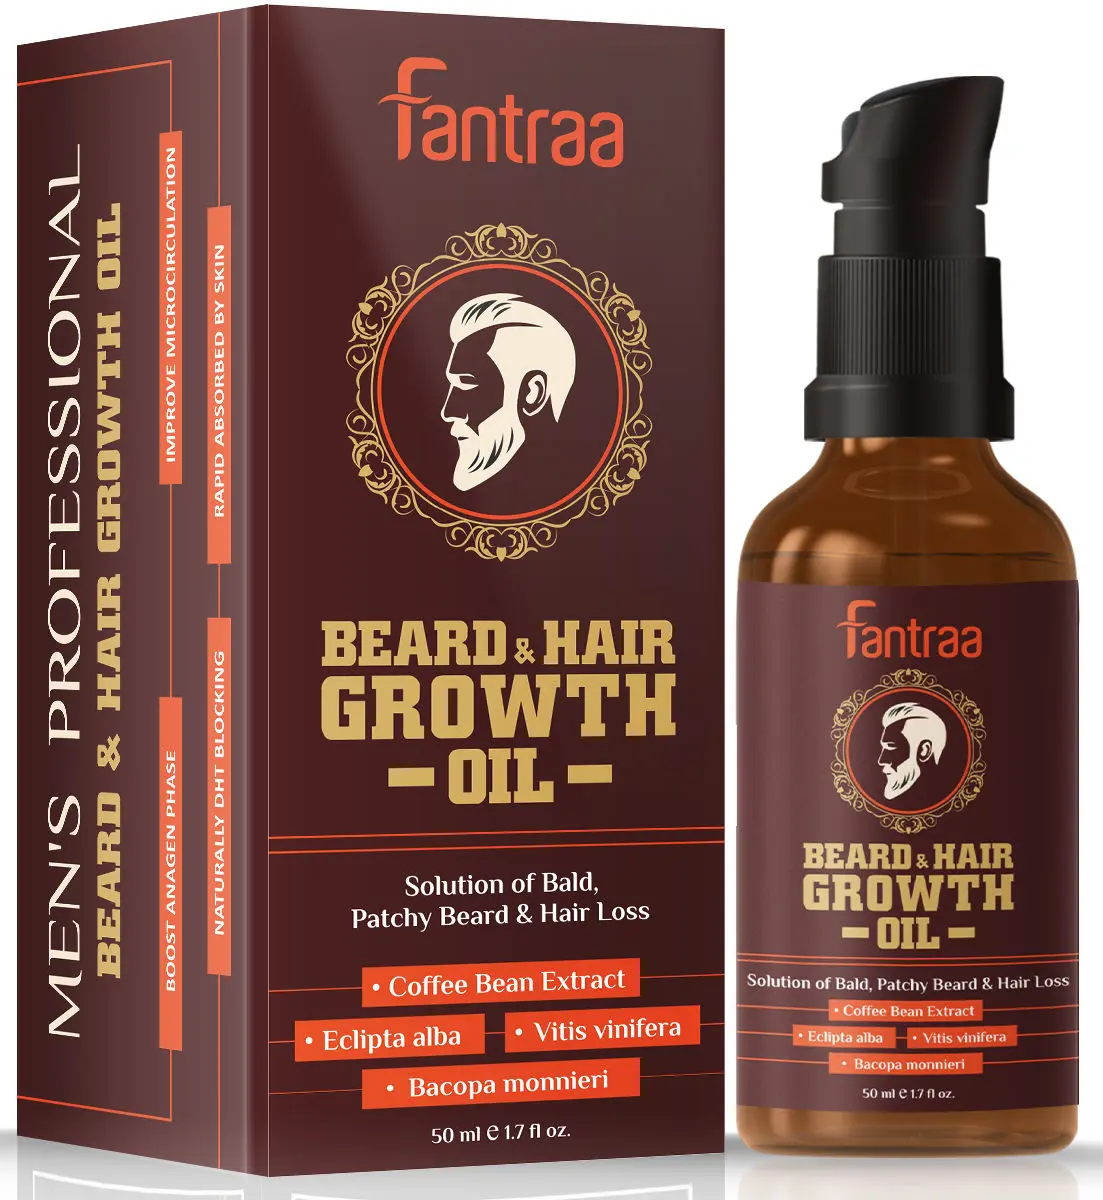 Fantraa Beard and Hair Growth Oil Enriched With Coffee Bean Extract (50 ml)